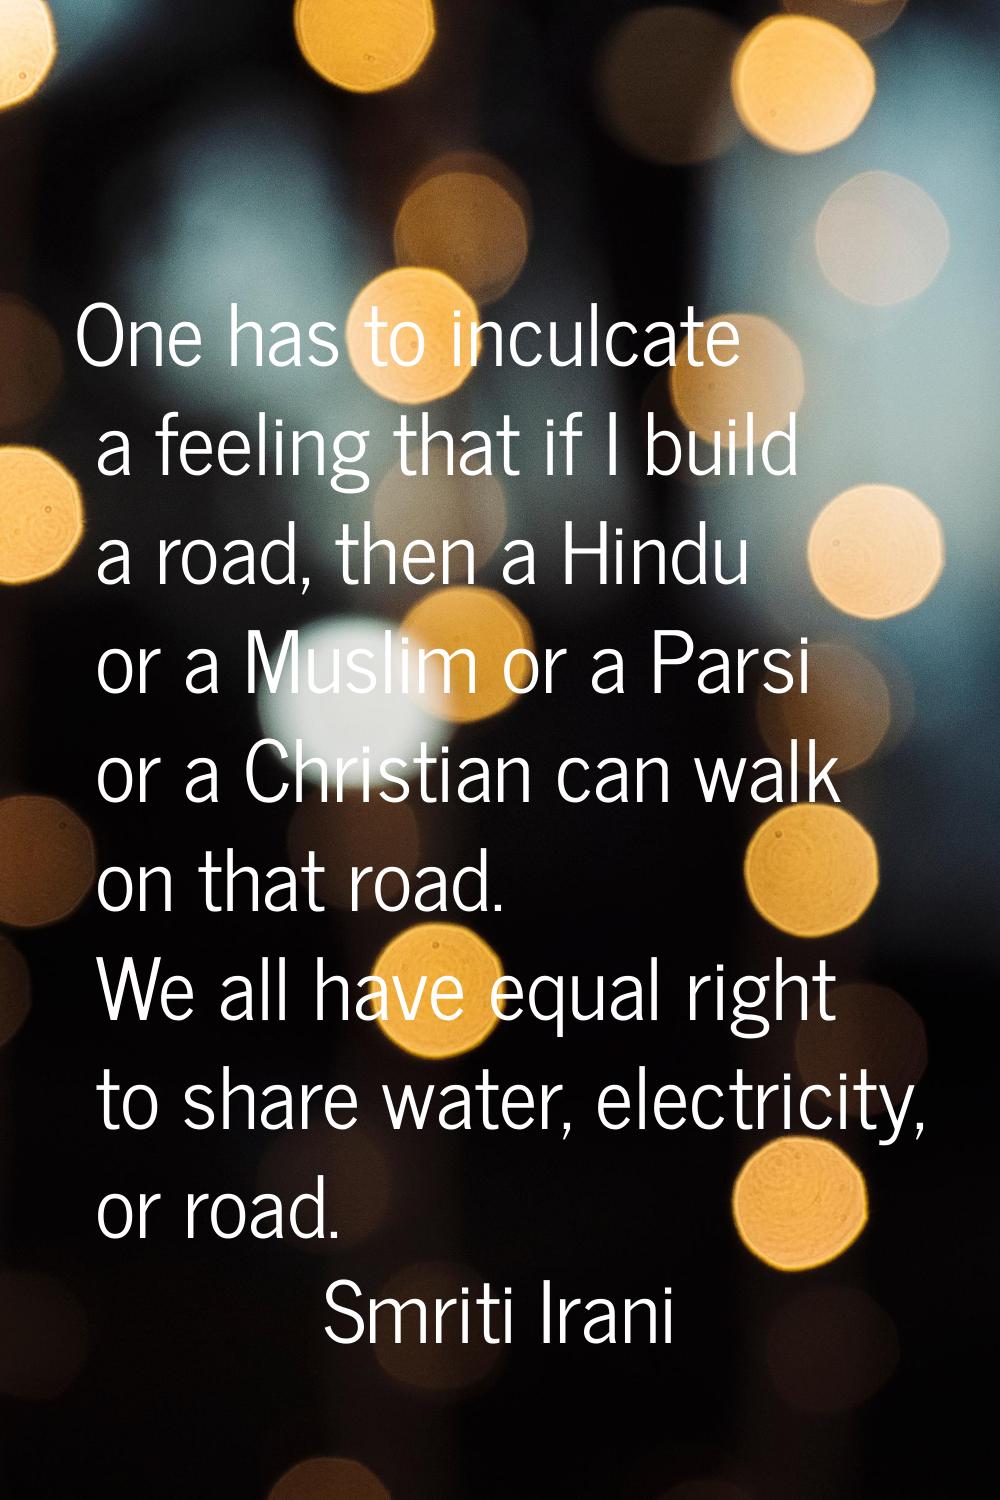 One has to inculcate a feeling that if I build a road, then a Hindu or a Muslim or a Parsi or a Chr